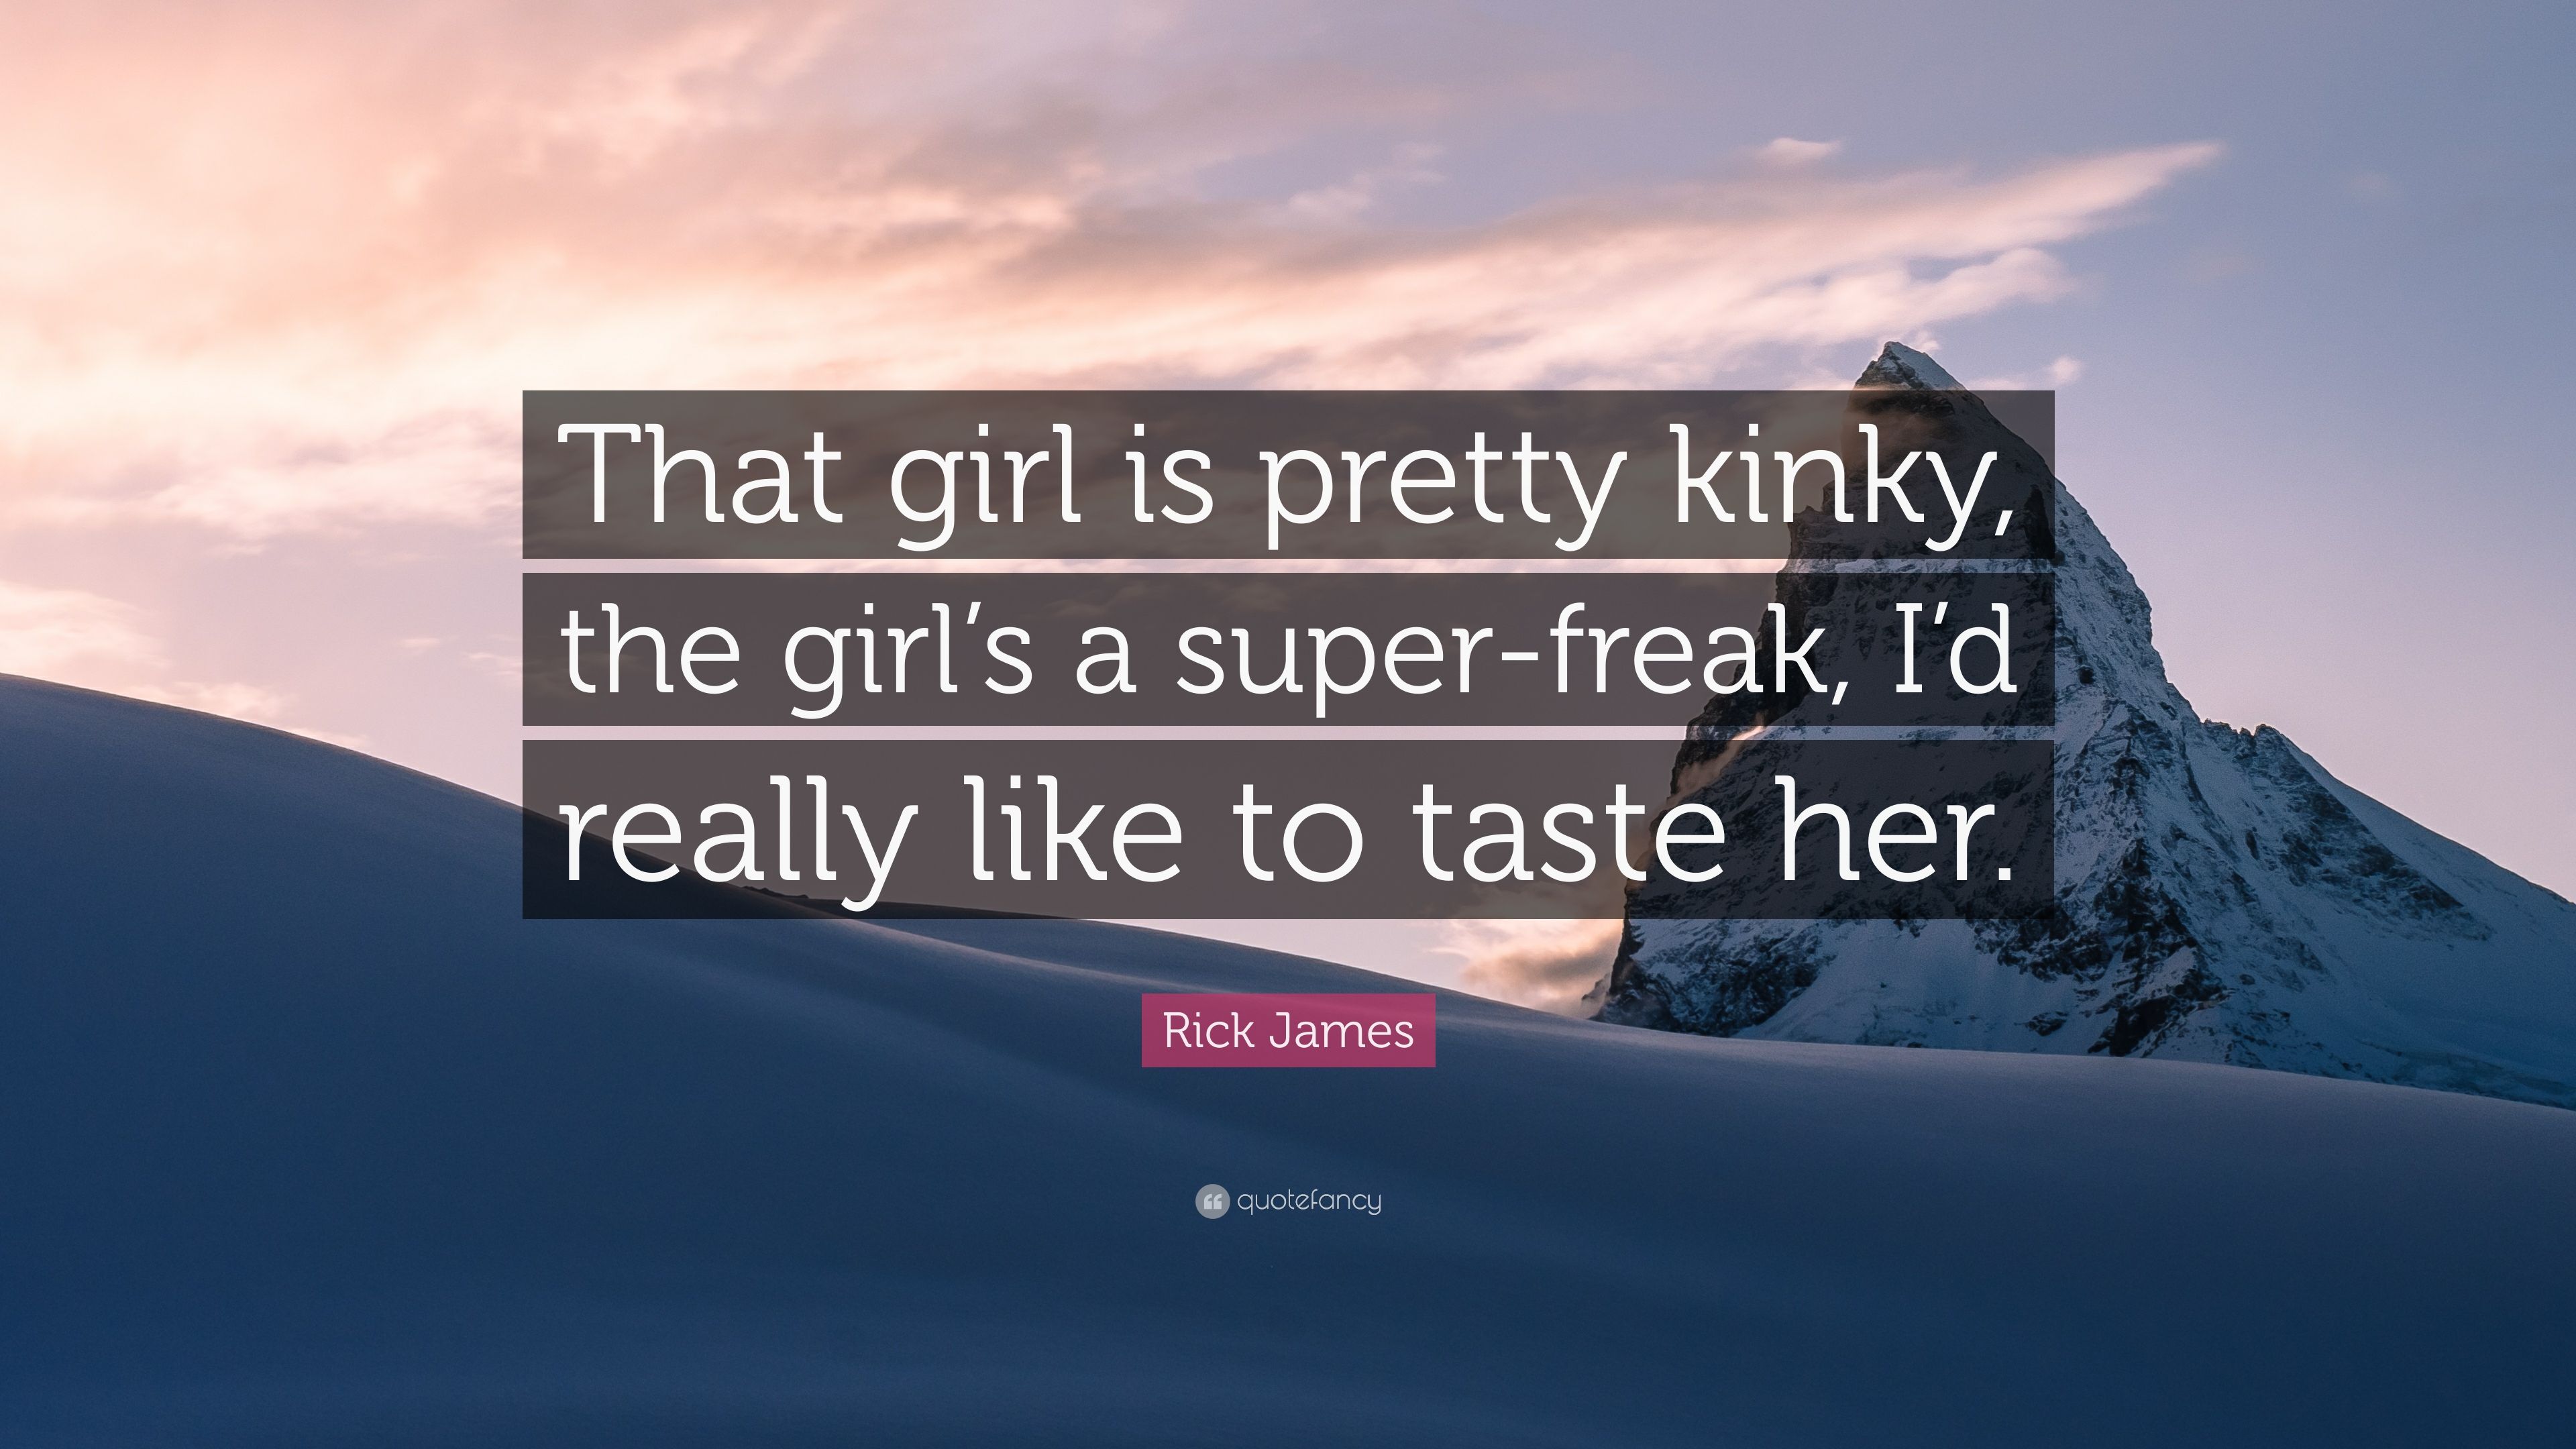 Rick James Quote: “That Girl Is Pretty Kinky, The Girl's A Super Freak, I'd Really